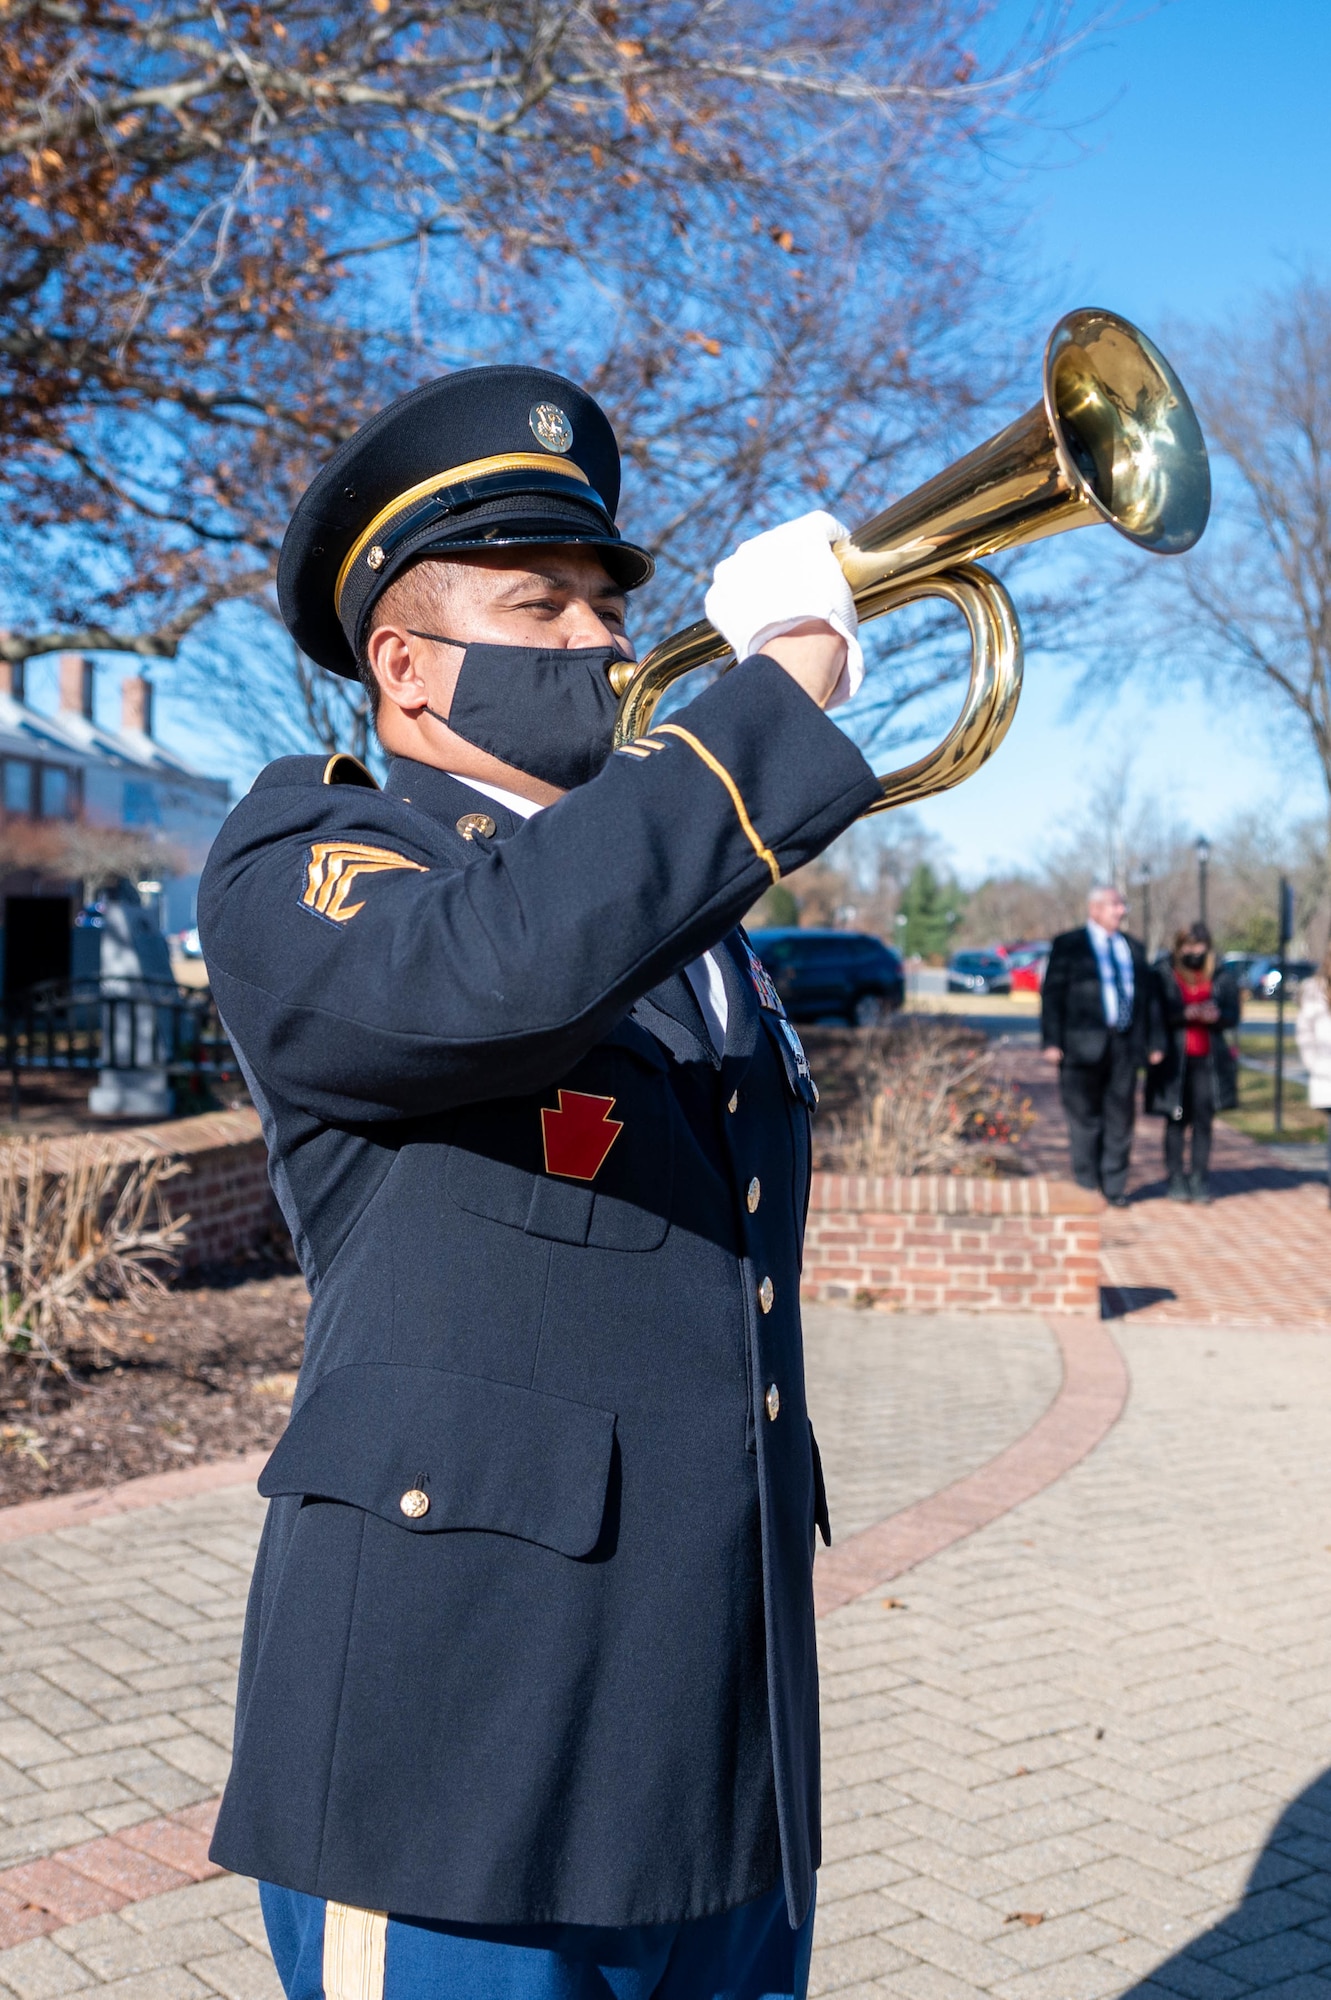 U.S. Army Sgt. 1st Class Jessier Belfast, 198th Expeditionary Signal Battalion administration supervisor, plays Taps at the conclusion of the Delaware Wreaths Across America event Dec. 13, 2021 in Dover, Delaware. After the ceremony, wreaths were laid at various war memorials in downtown Dover. (U.S. Air Force photo by Mauricio Campino)